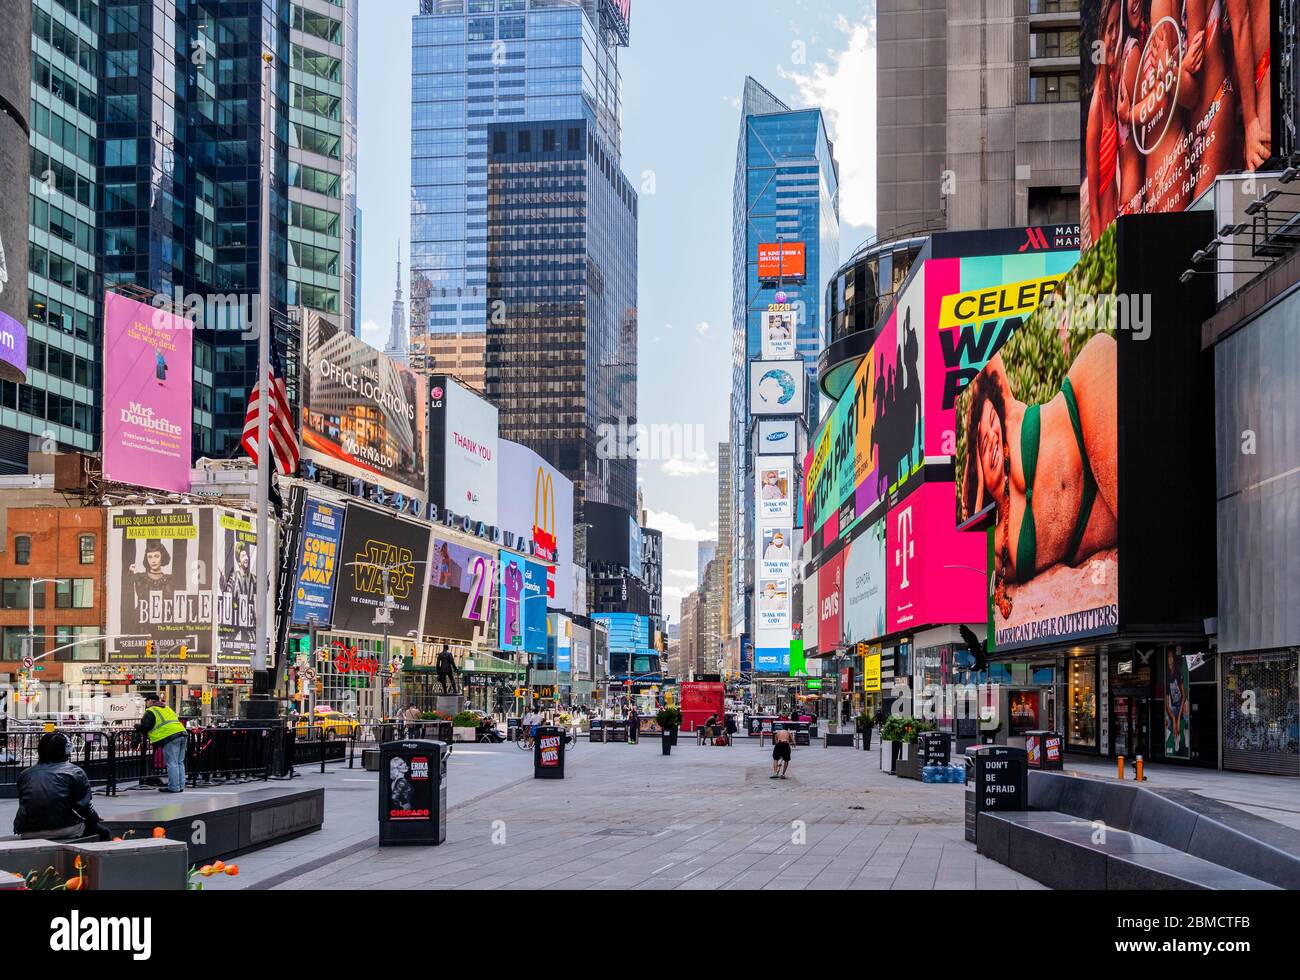 Manhattan, New York - May 7, 2020: Uncommonly Empty Streets of Times Square New York City During the COVID-19 Pandemic Outbreak. Stock Photo